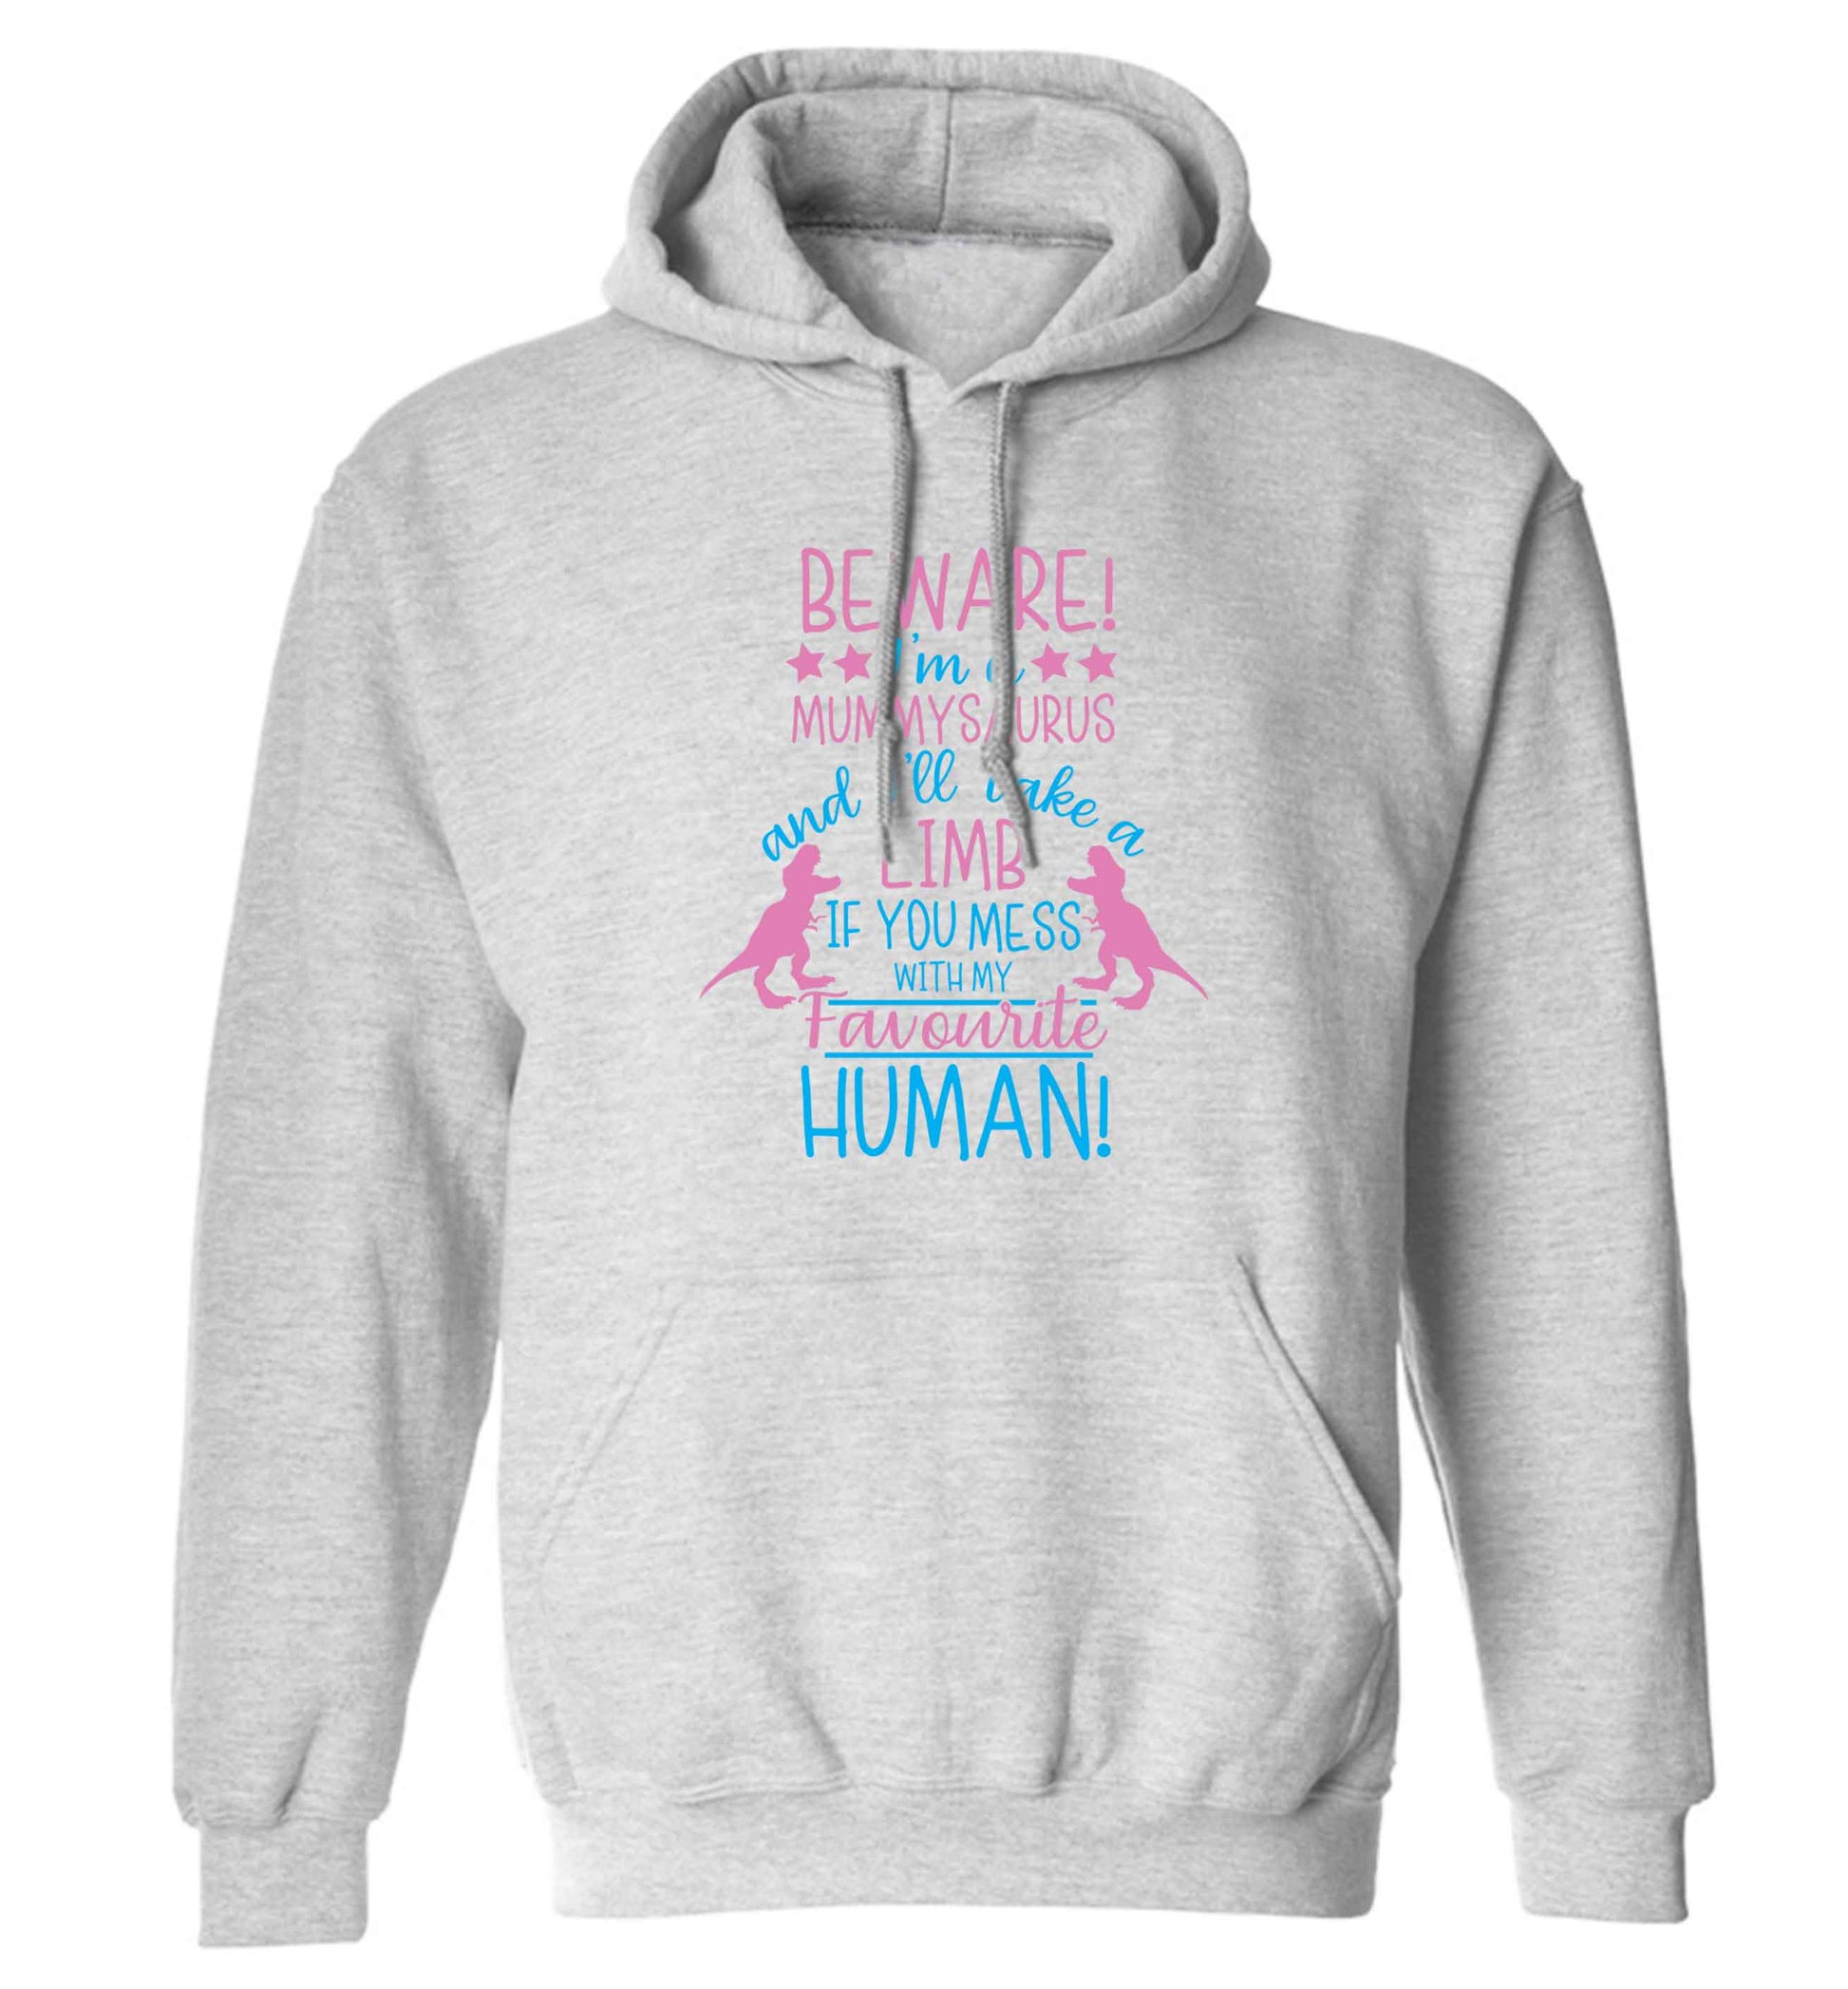 Perfect gift for any protective mummysaurus! Beware I'm a mummysaurus and I'll take a limb if you mess with my favourite human adults unisex grey hoodie 2XL